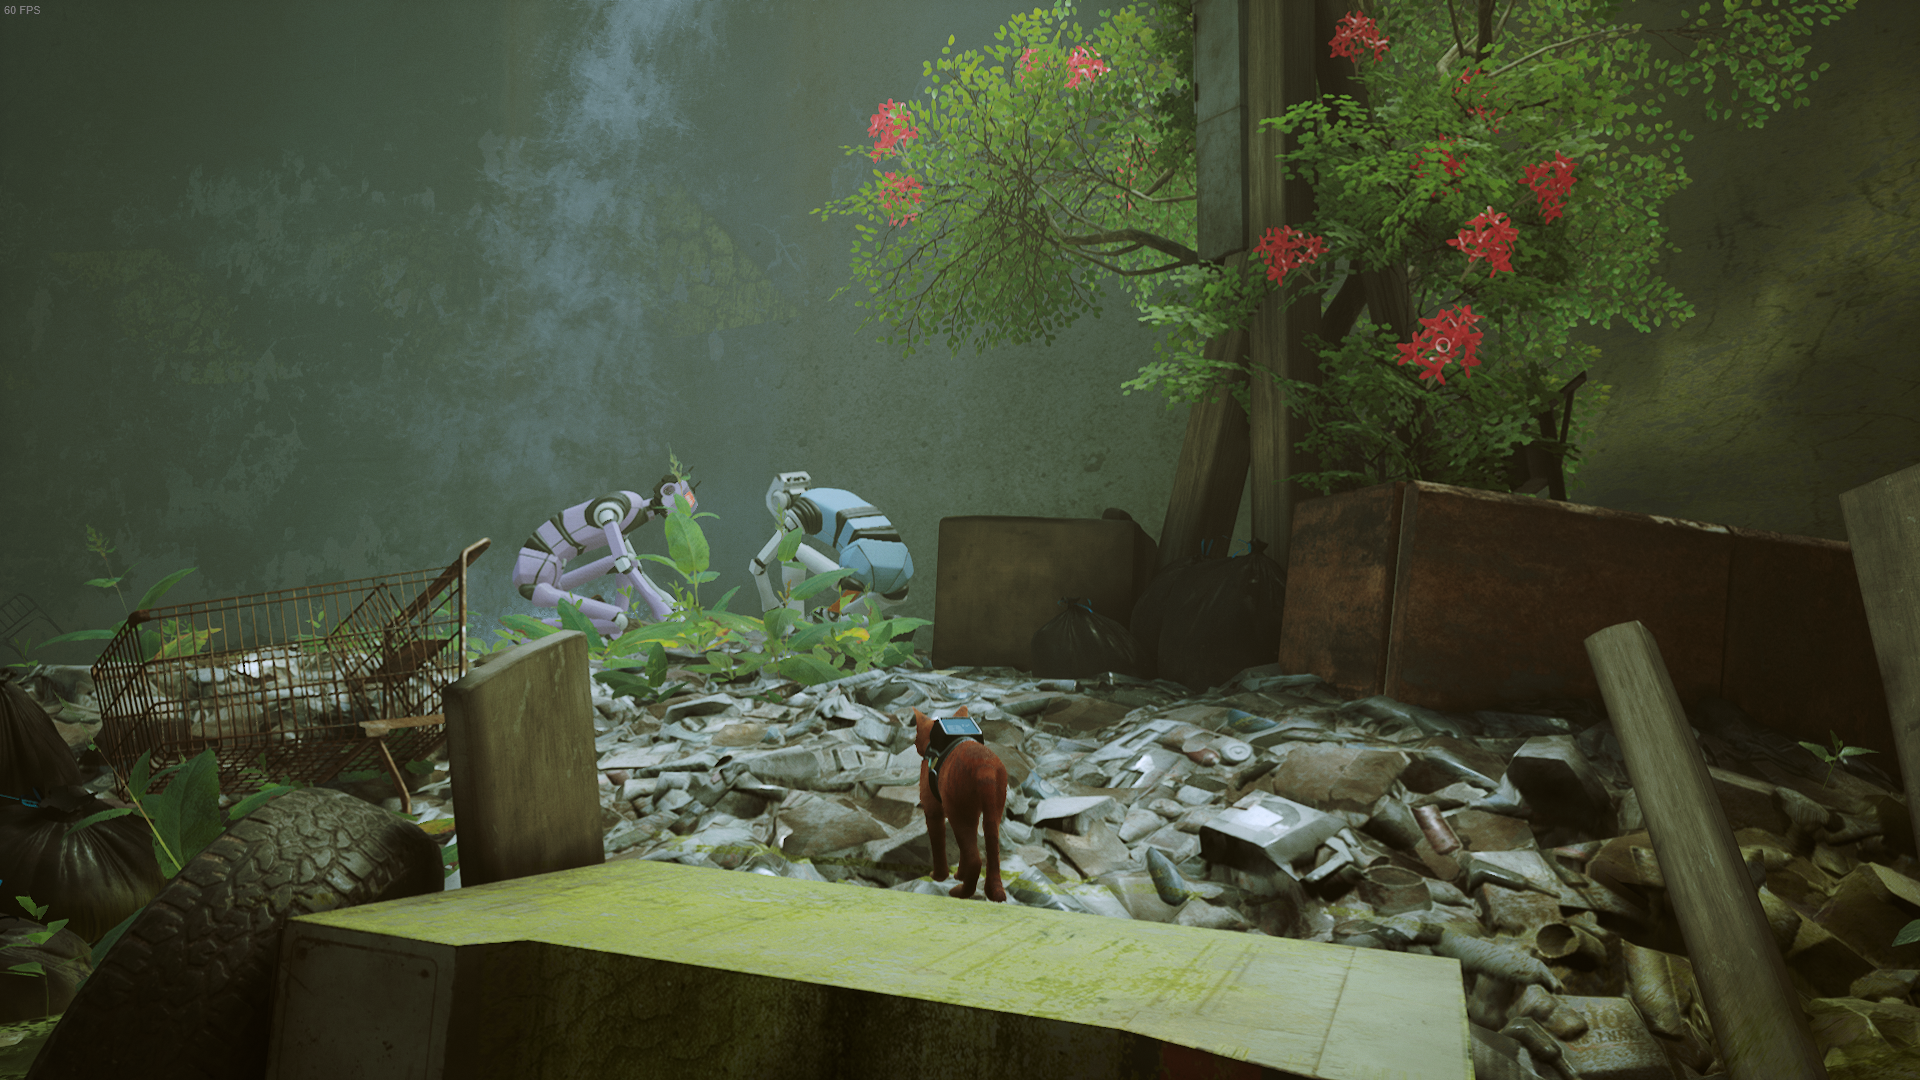 The cat of Stray looks at two robots scavenging beside a tree with red flowers in Antvillage.